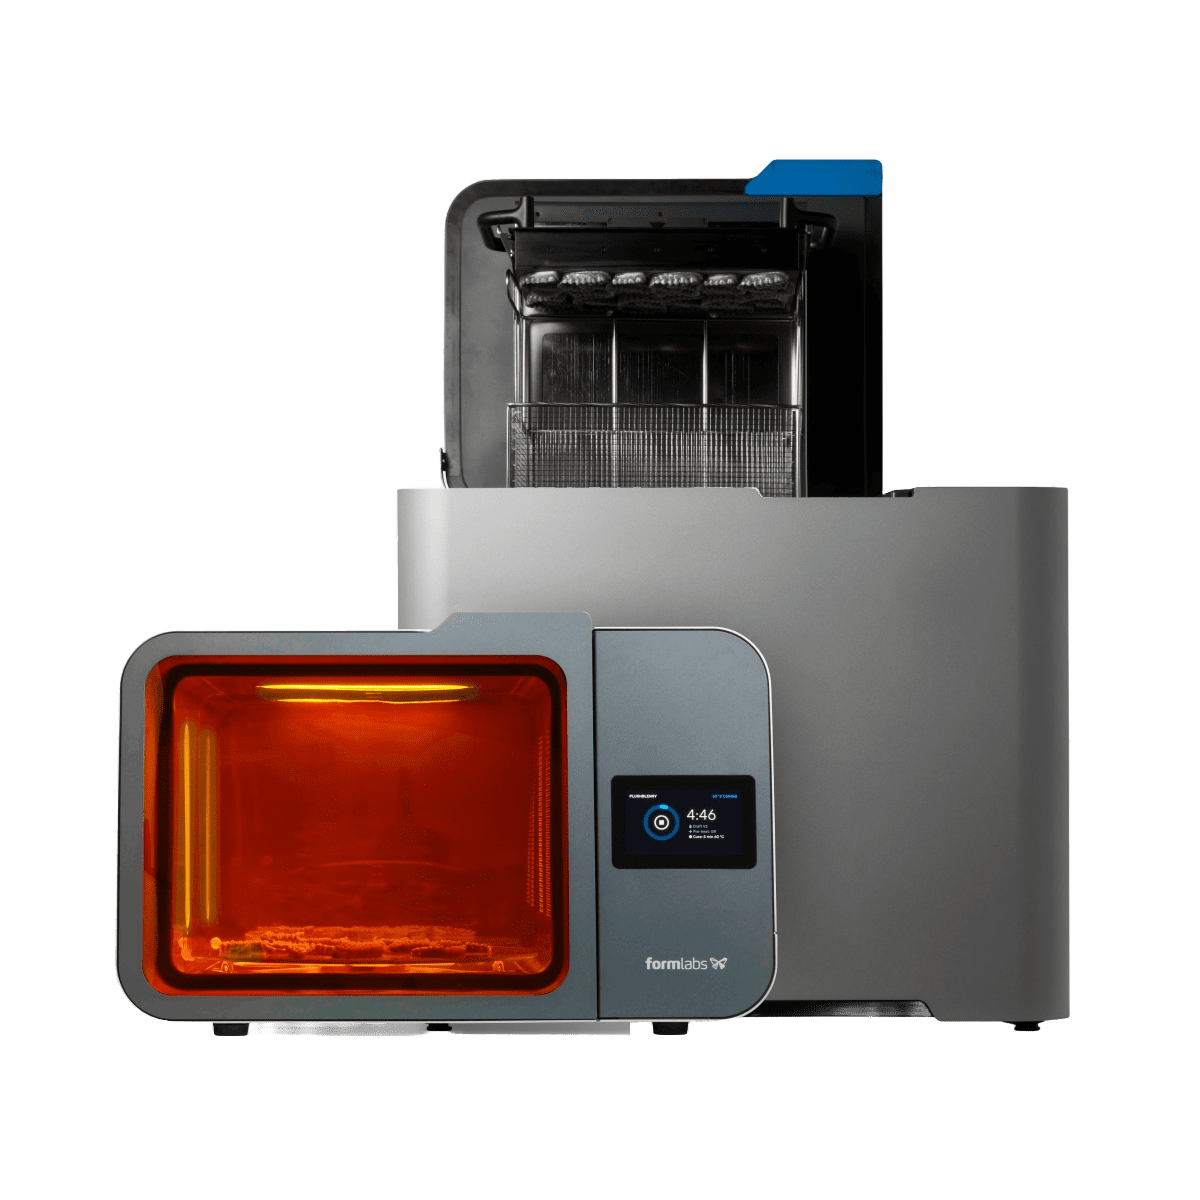 Image shows Formlabs post-processing systems, Form Wash L and Form Cure L